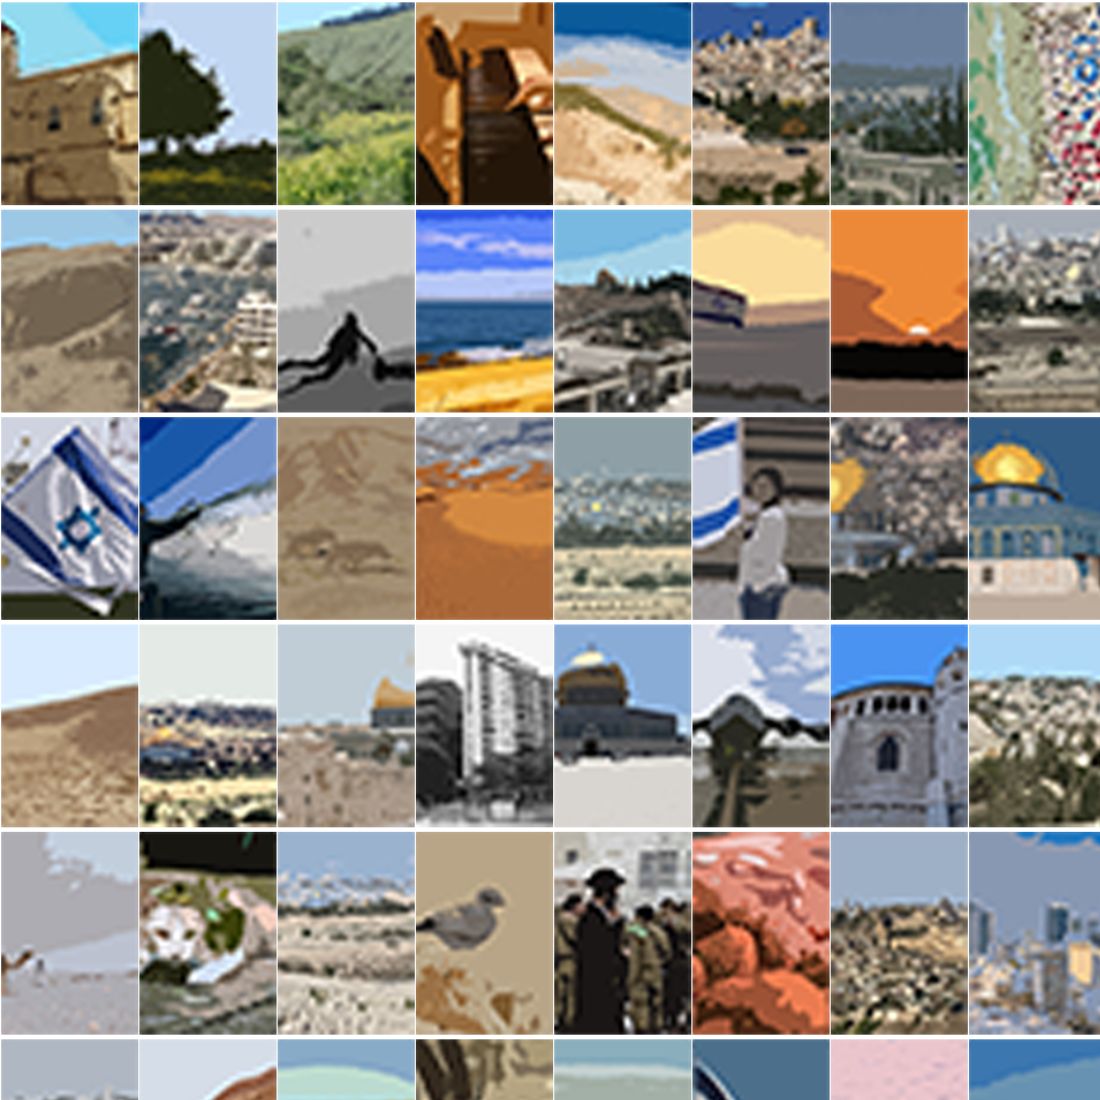 146 Illustrations and Collage Prints of Israel preview image.